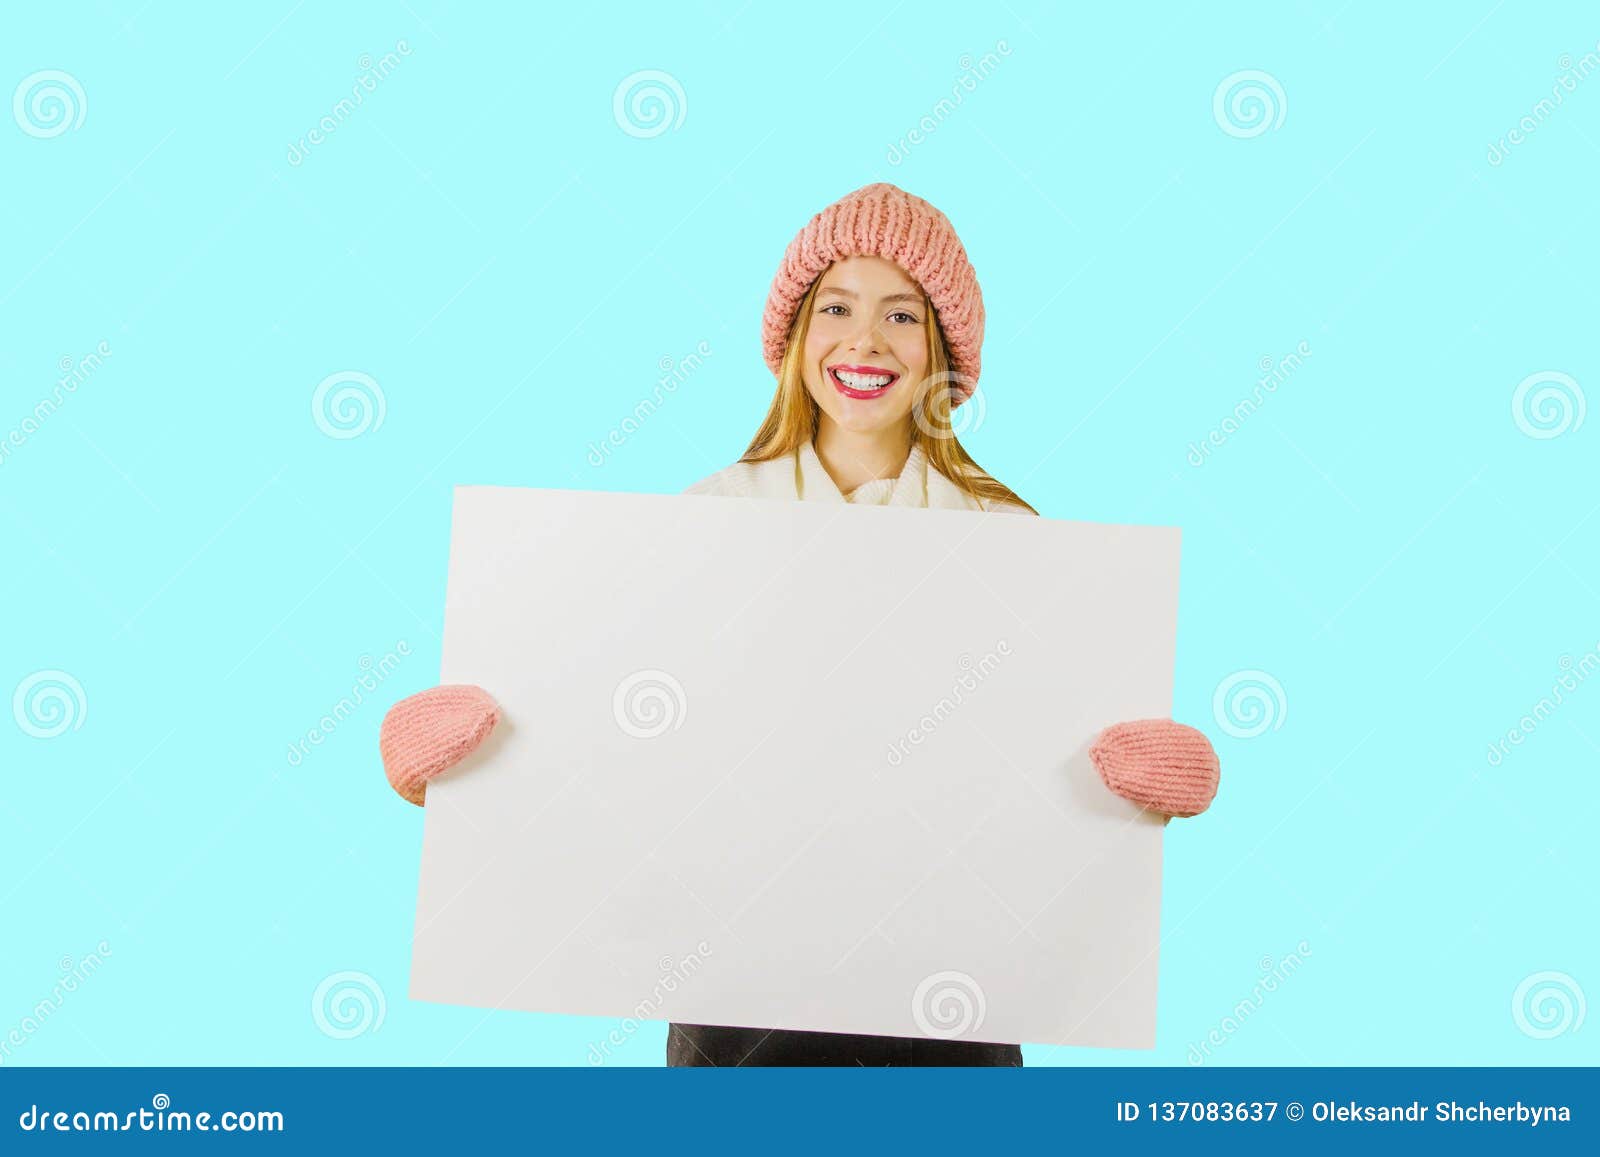 Beautiful Girl Holding A Blank Poster For Text Or ...